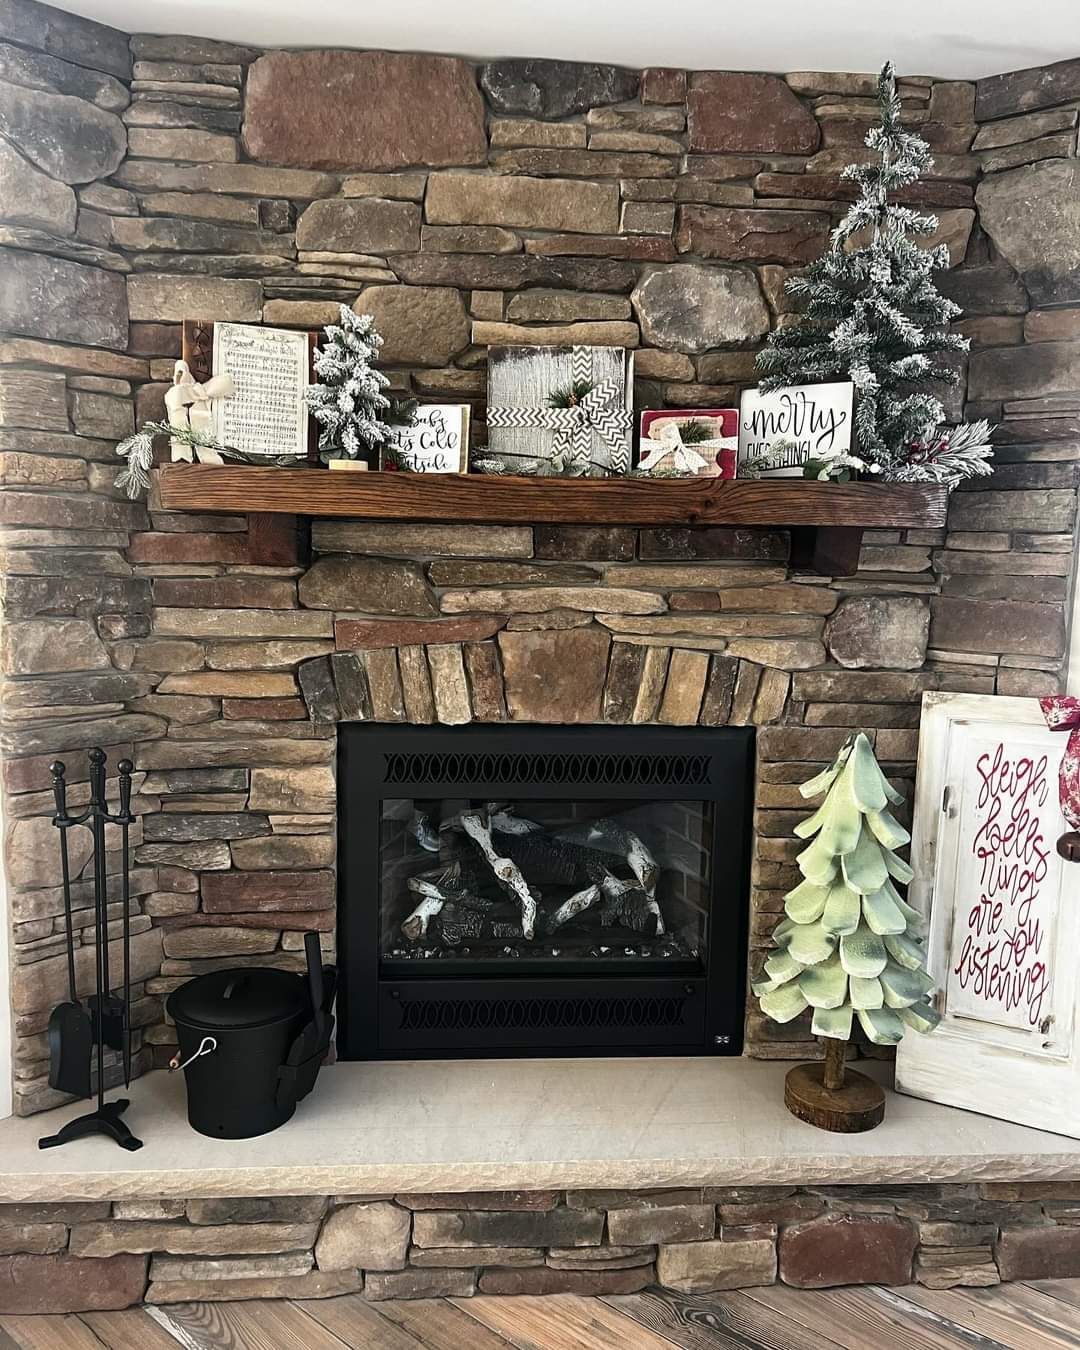 New Fireplace — Modern Fireplace With Brick Wall in Lan ghorne, PA